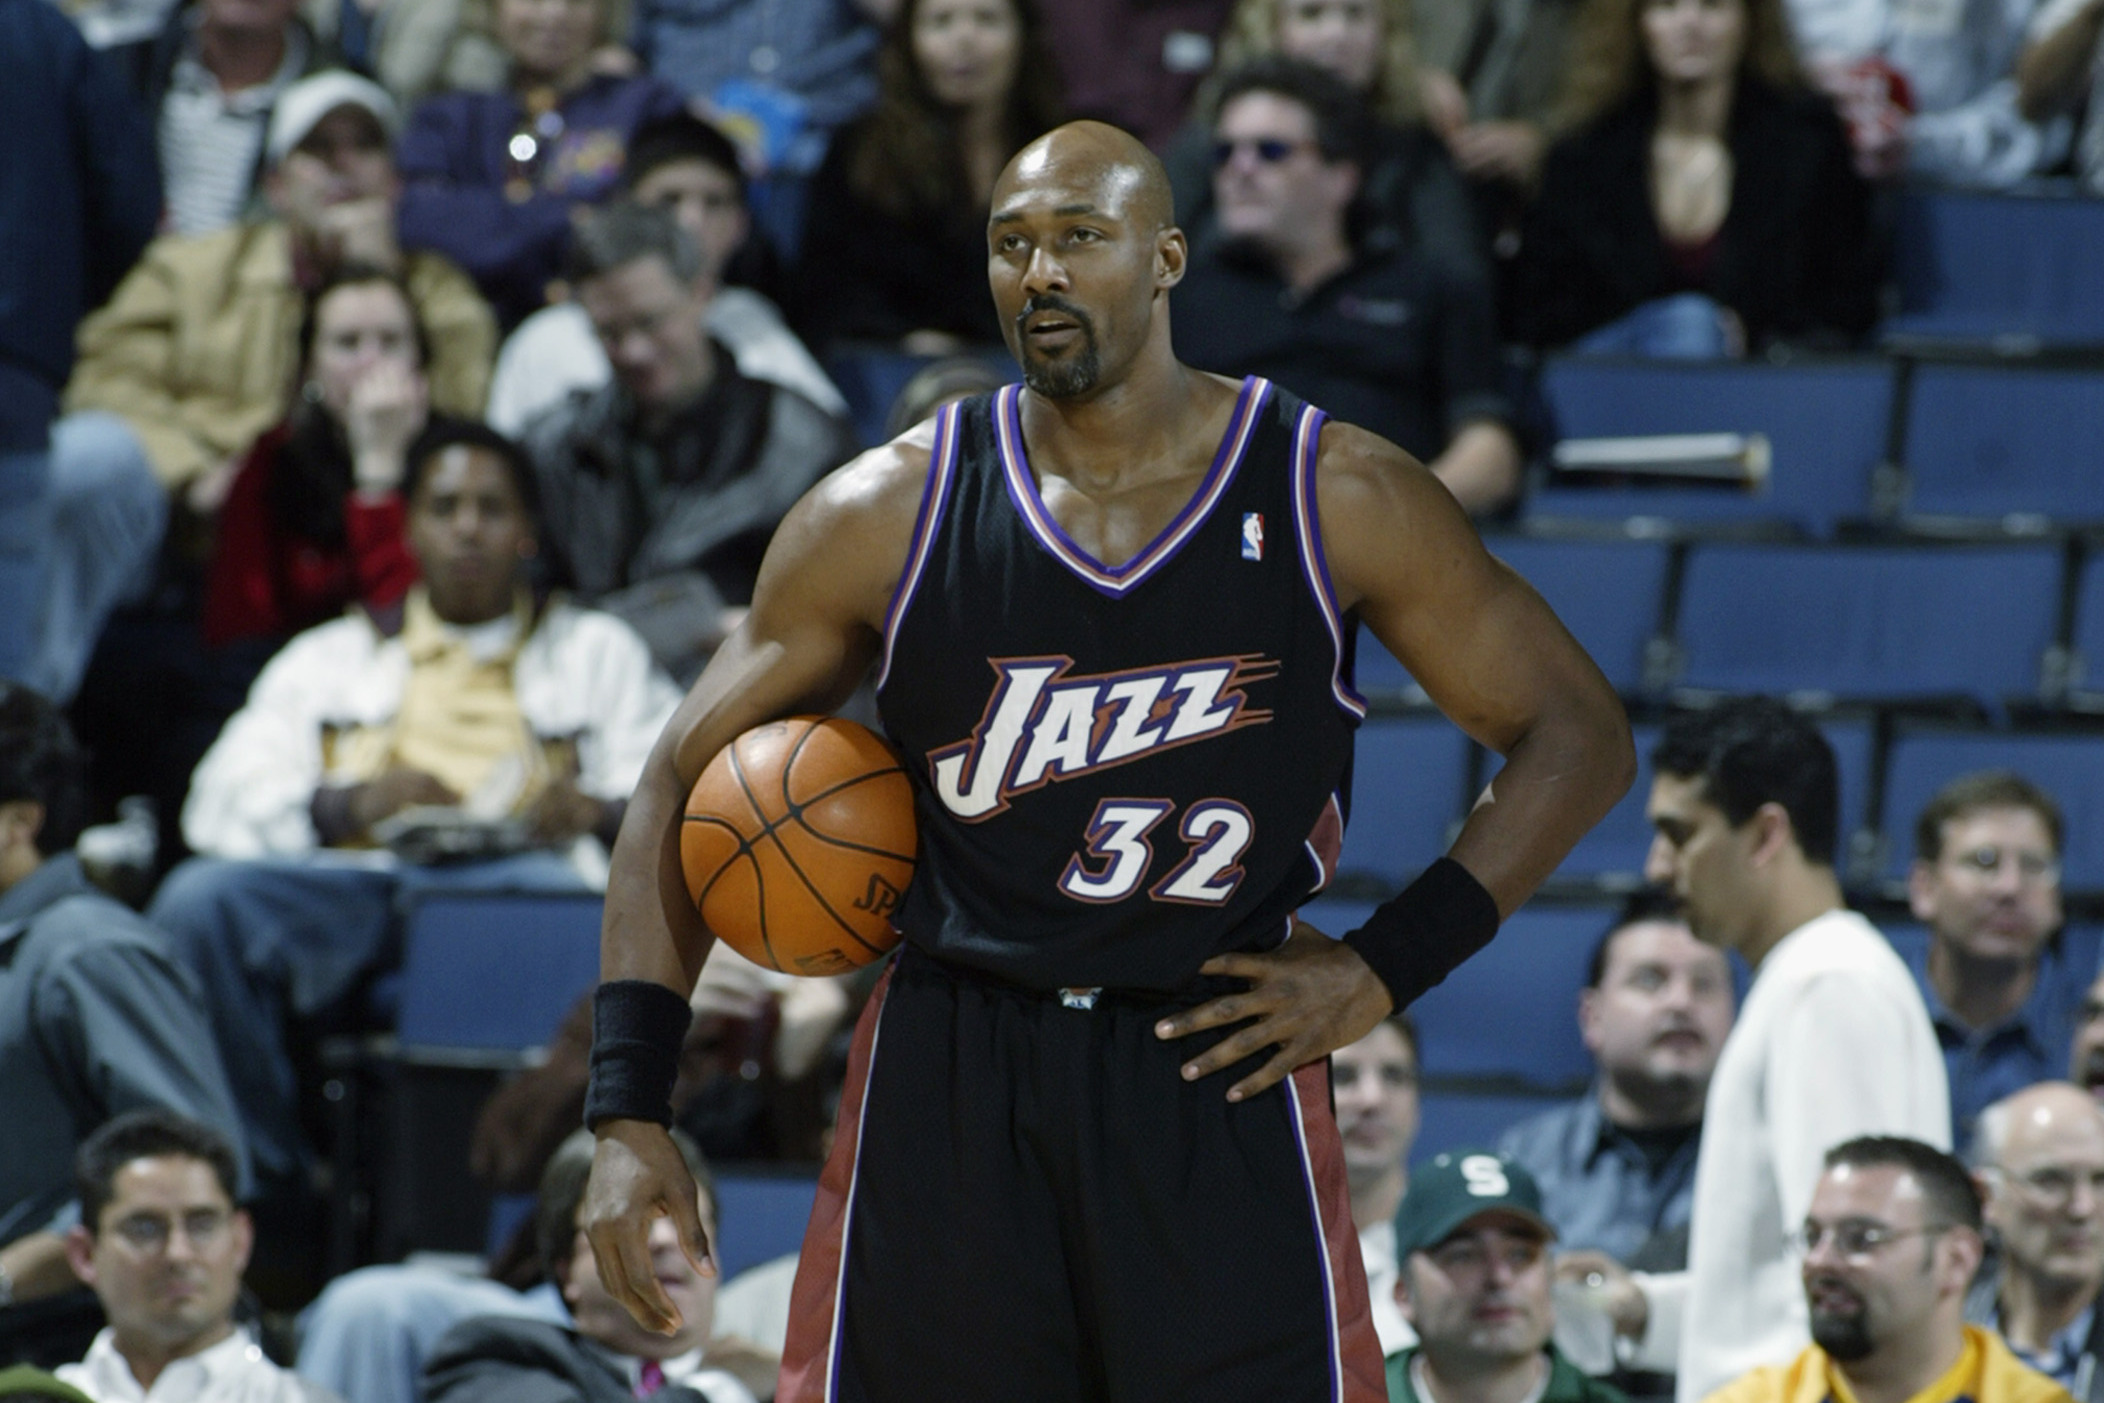 Karl Malone knows opinion on him has shifted, but he won't discuss it